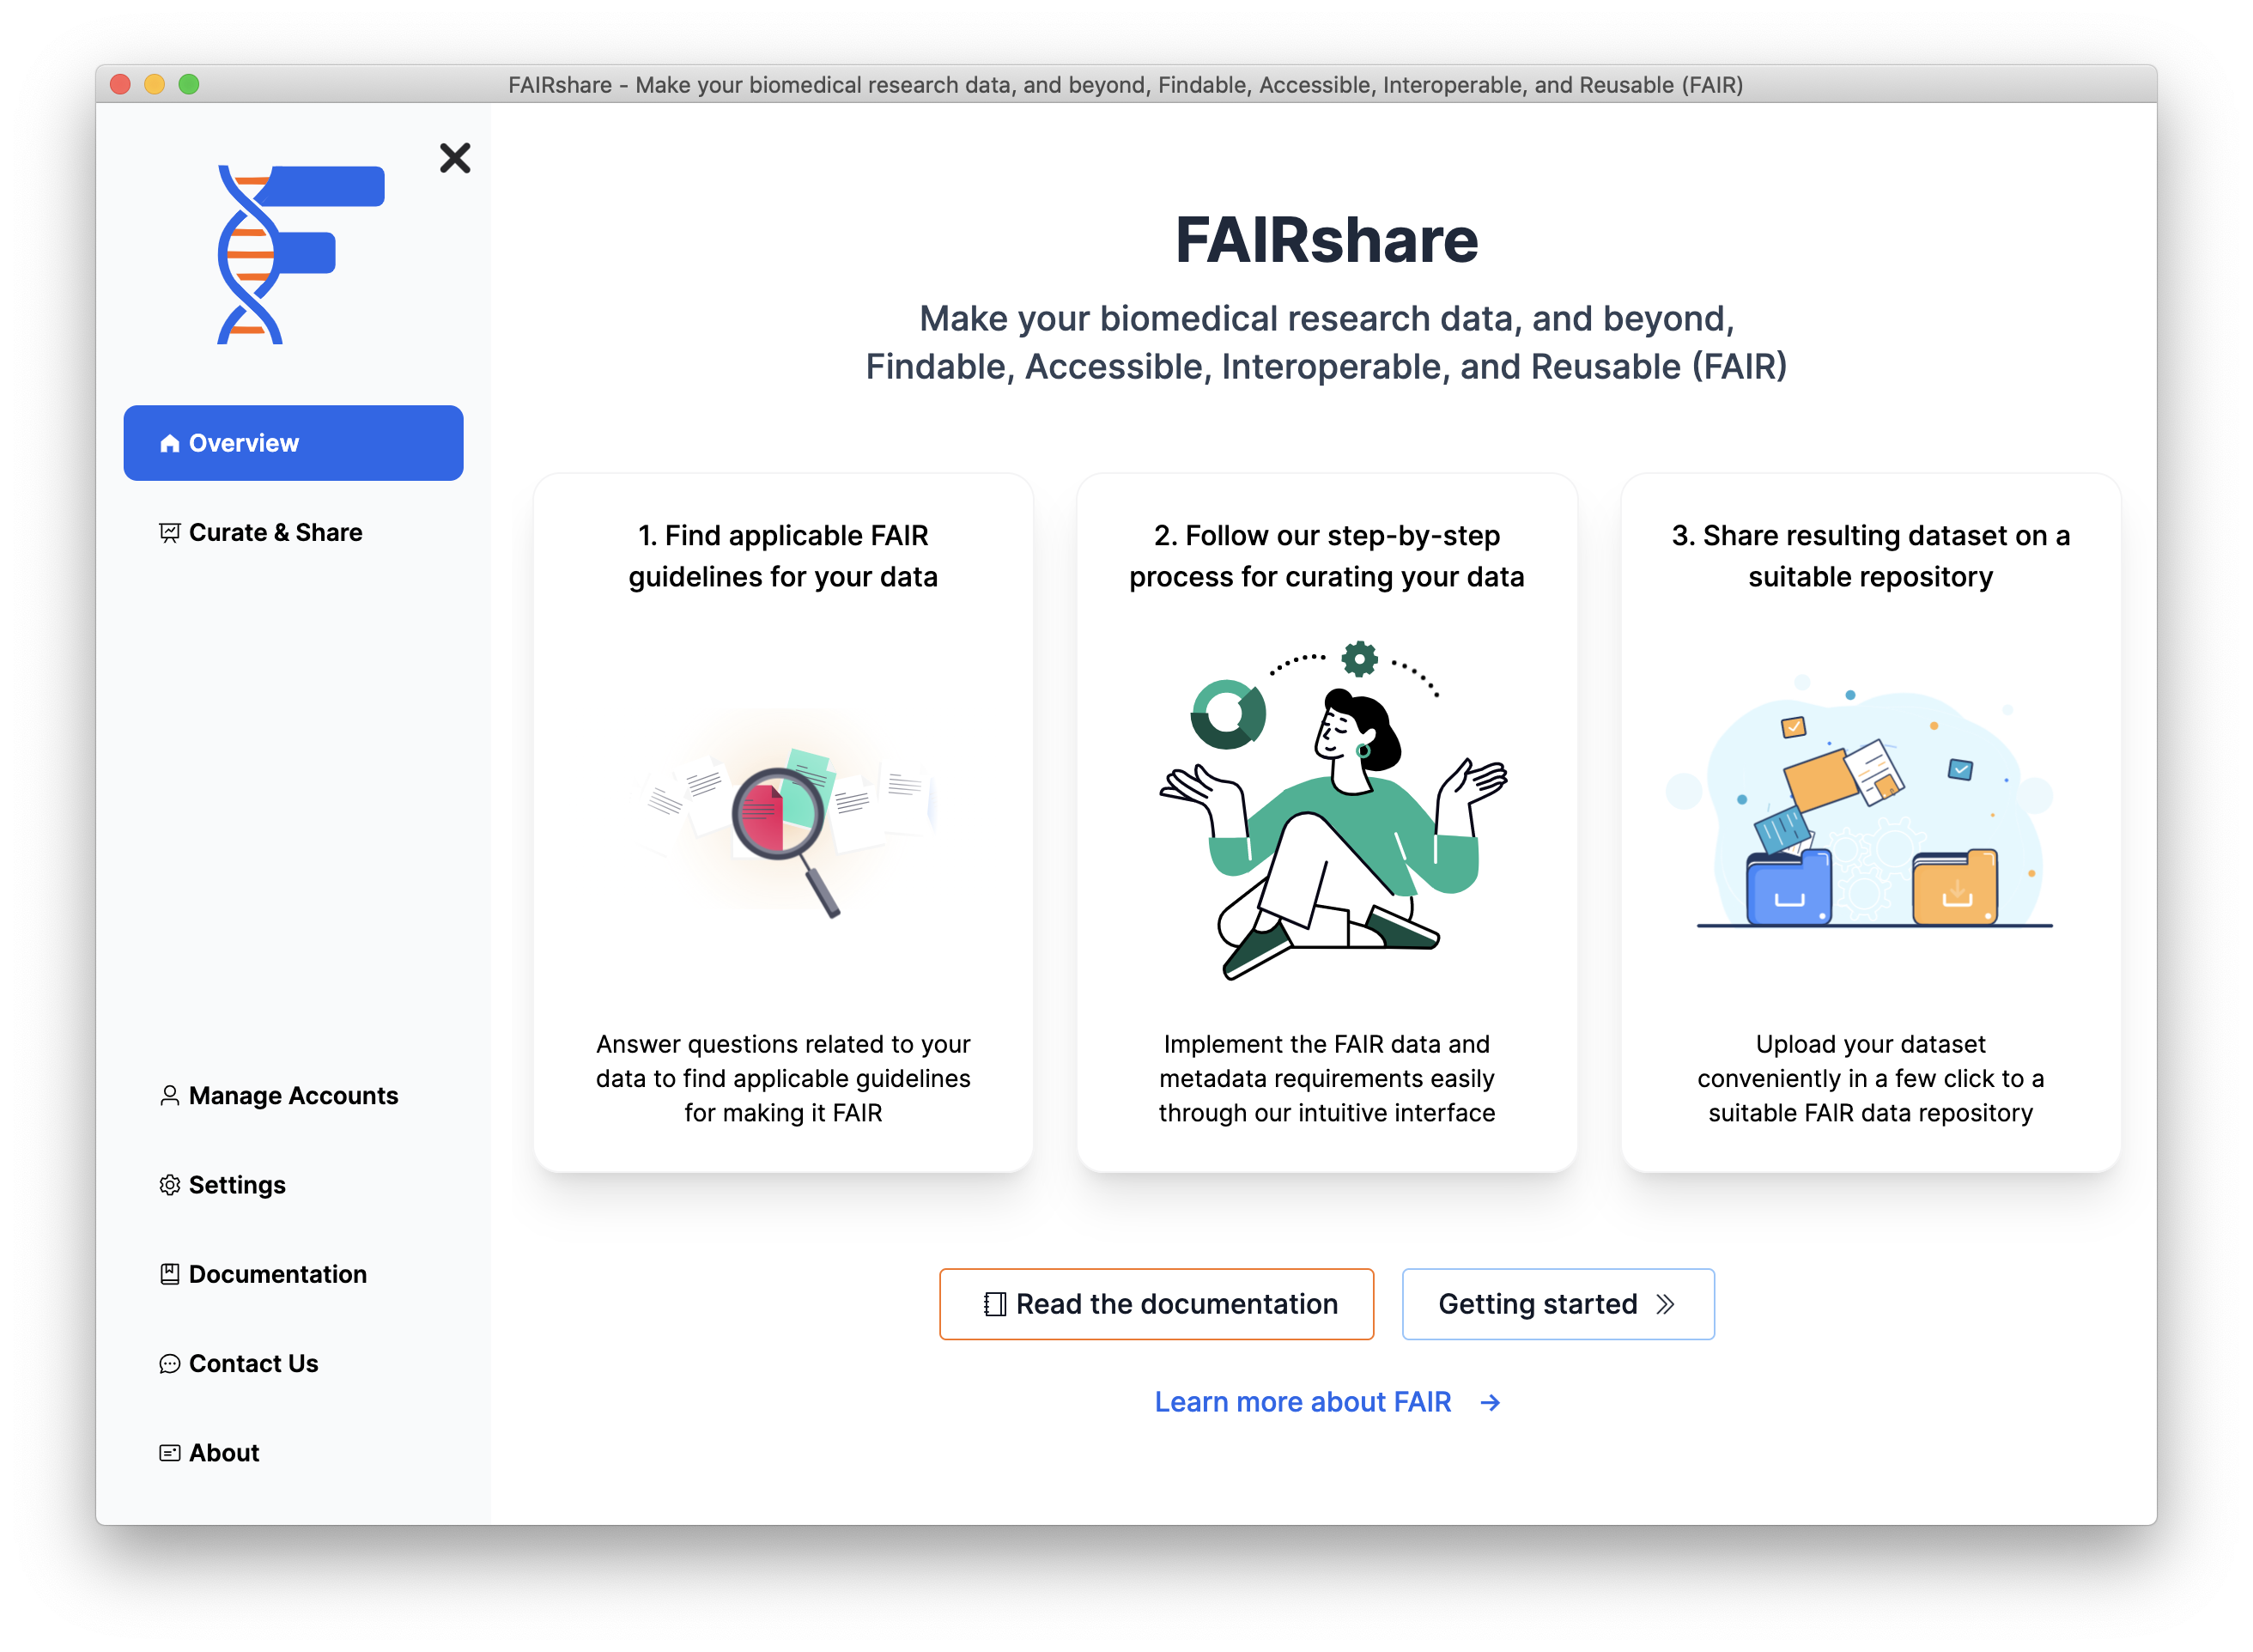 A screenshot of the FAIRshare app on macOS.